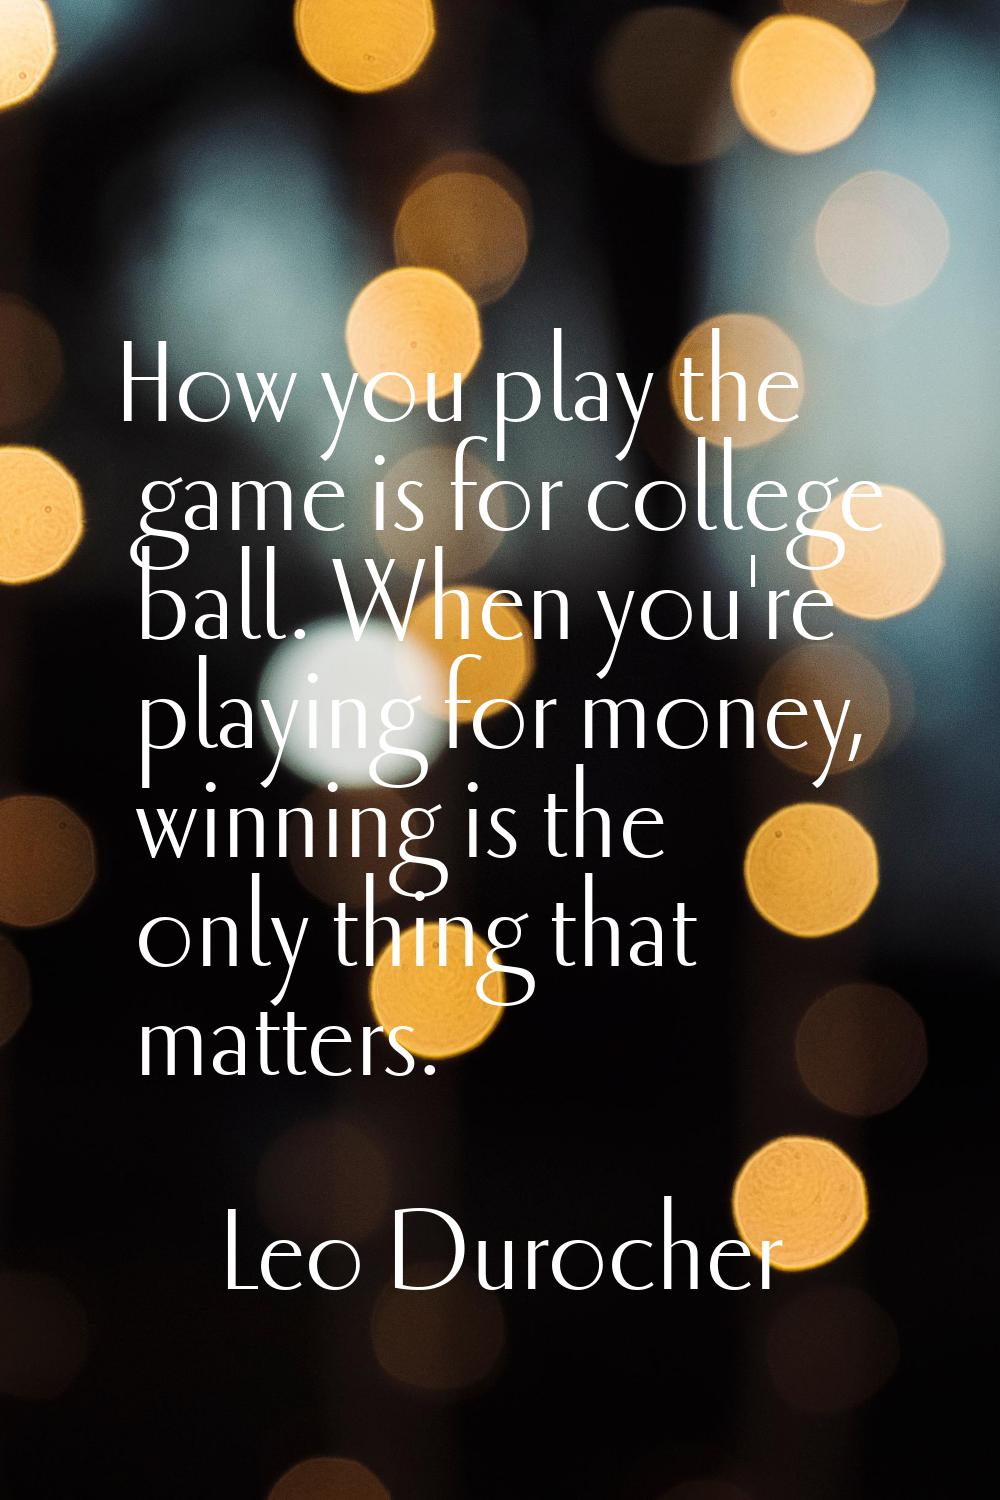 How you play the game is for college ball. When you're playing for money, winning is the only thing